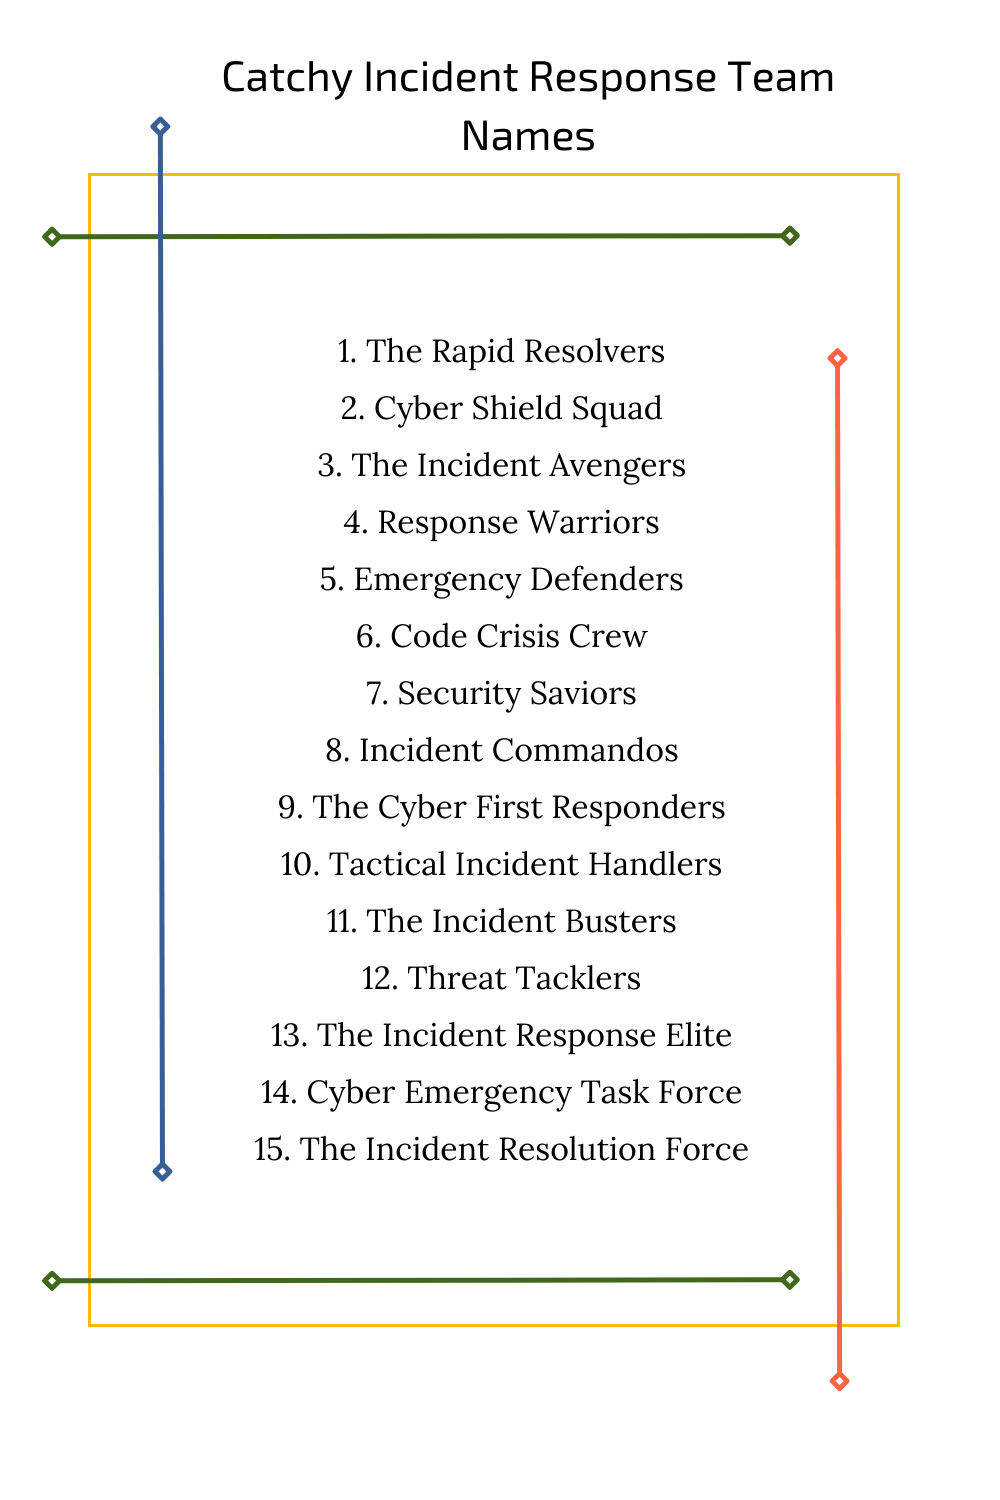 Catchy Incident Response Team Names